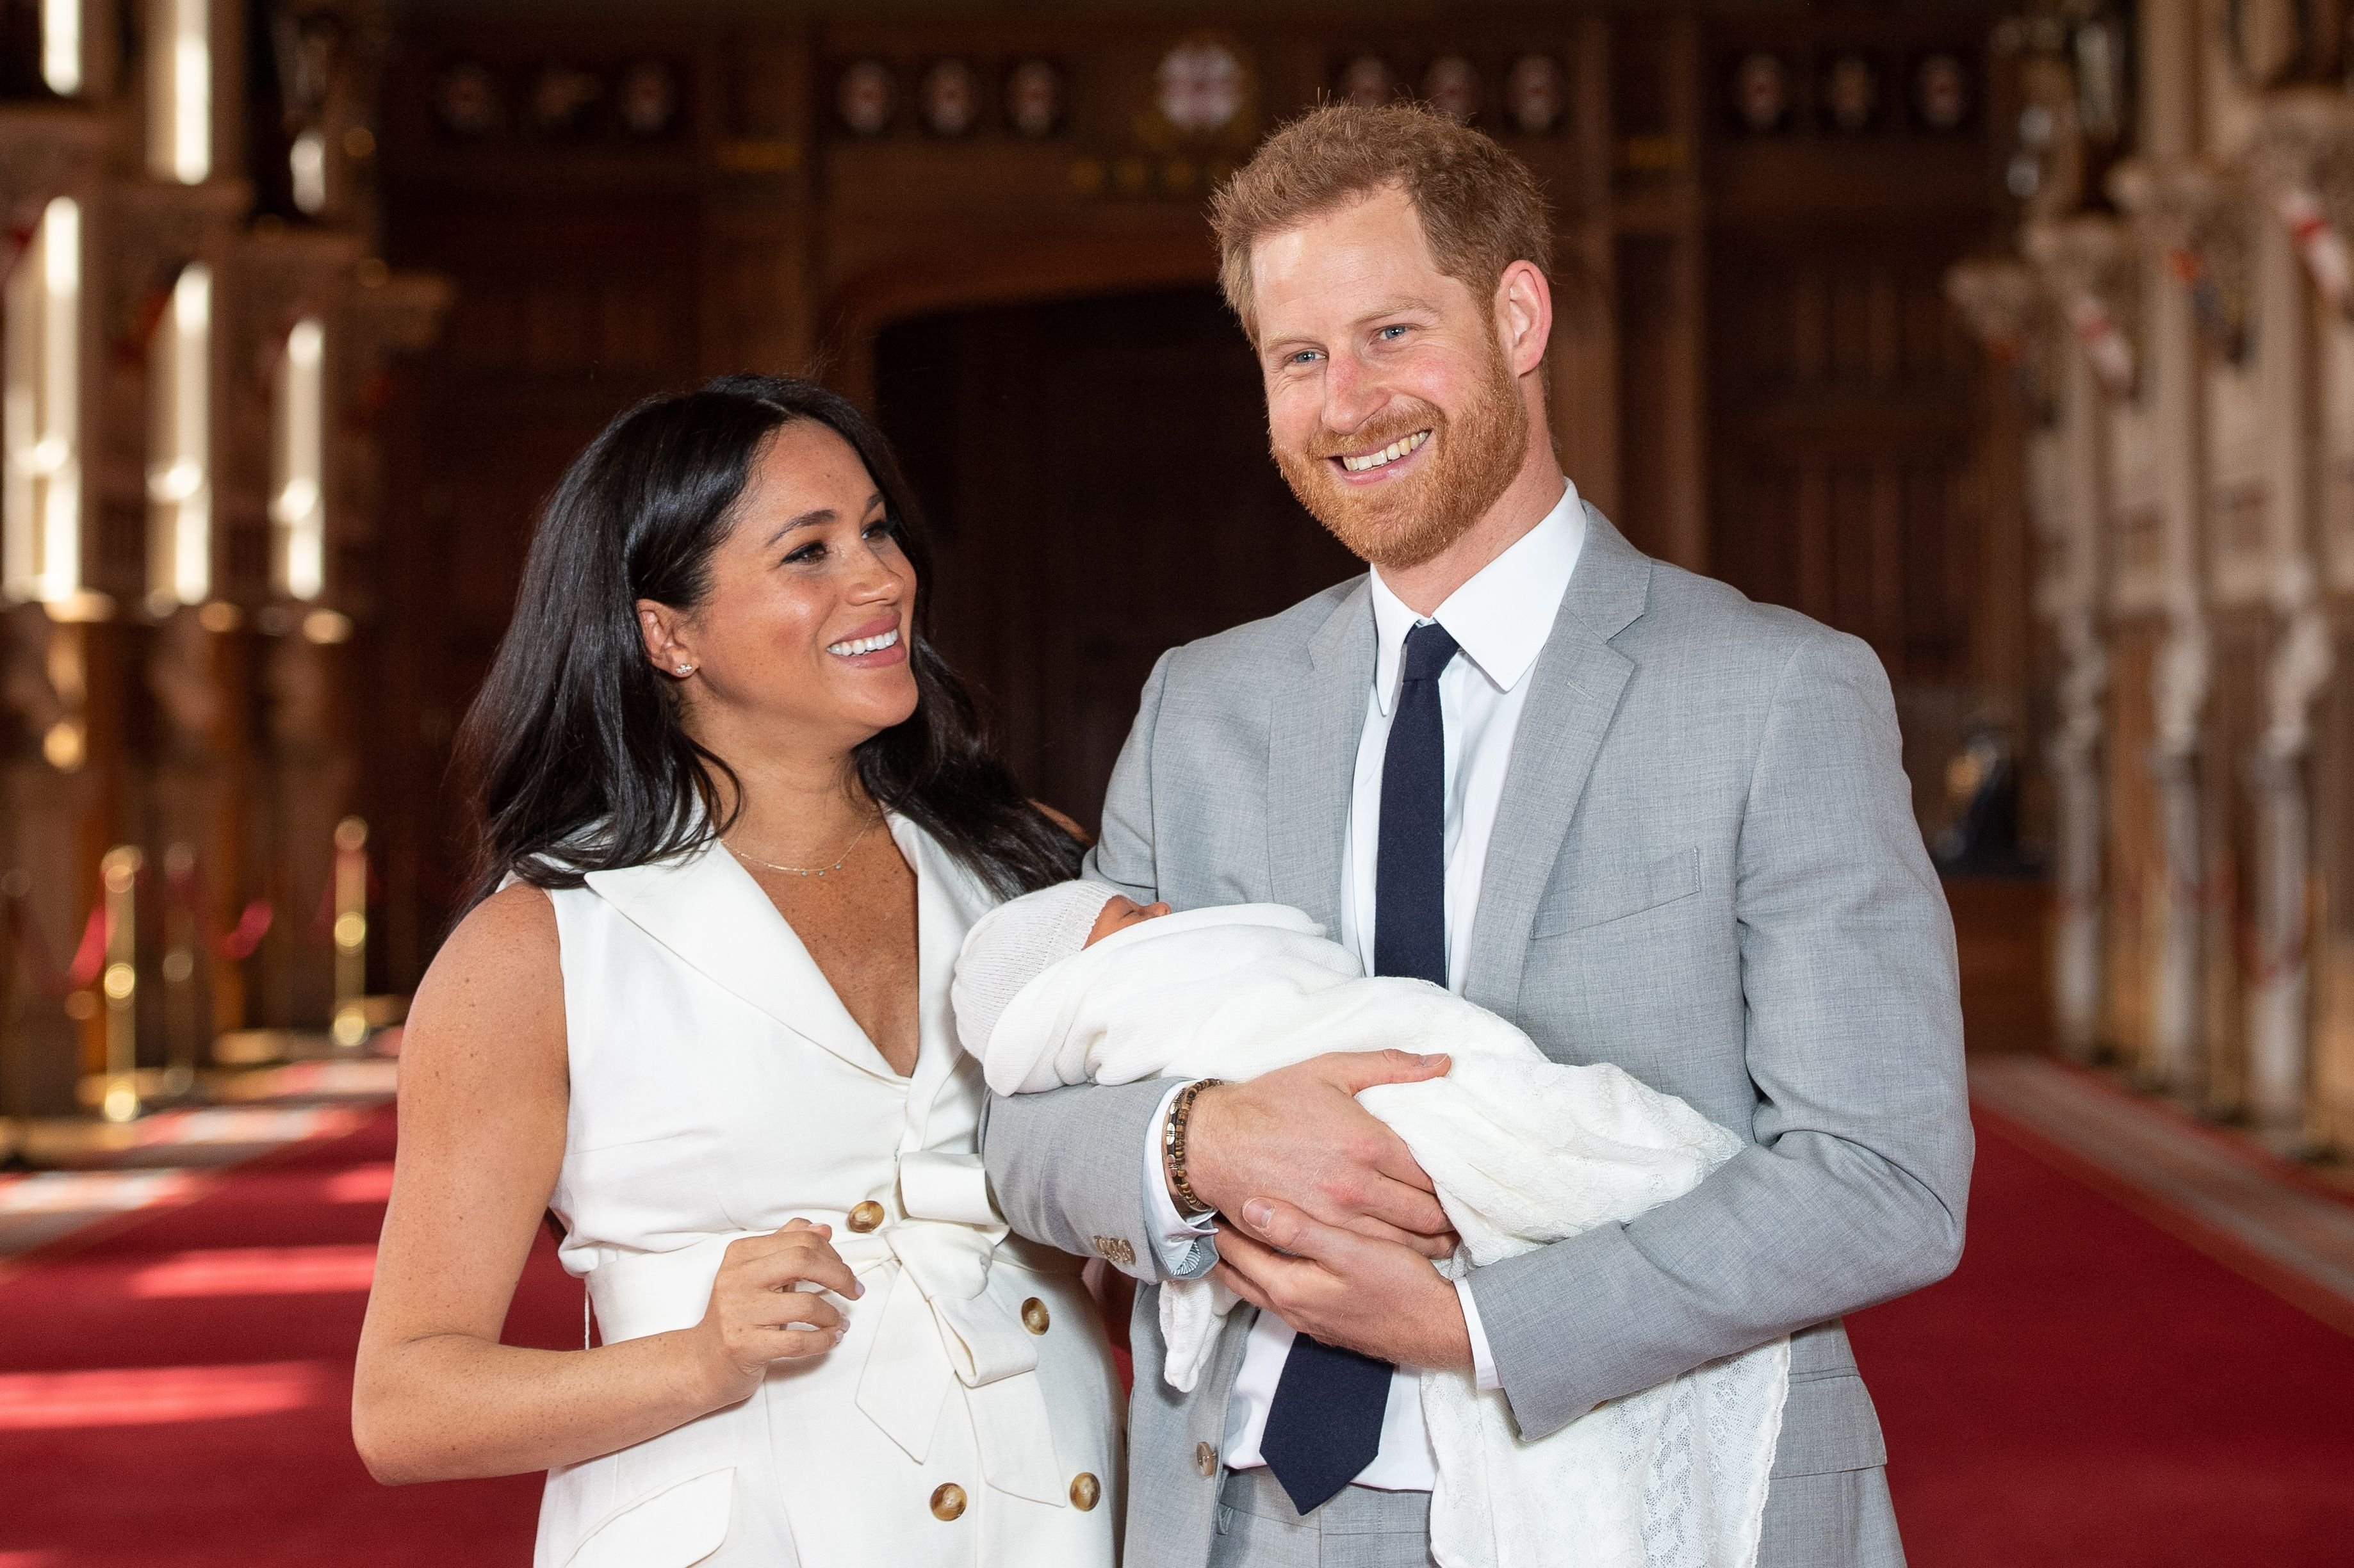 Meghan Markle, Prince Harry and their son in St George's Hall at Windsor Castle on May 8, 2019 in Windsor, England | Photo: Getty Images